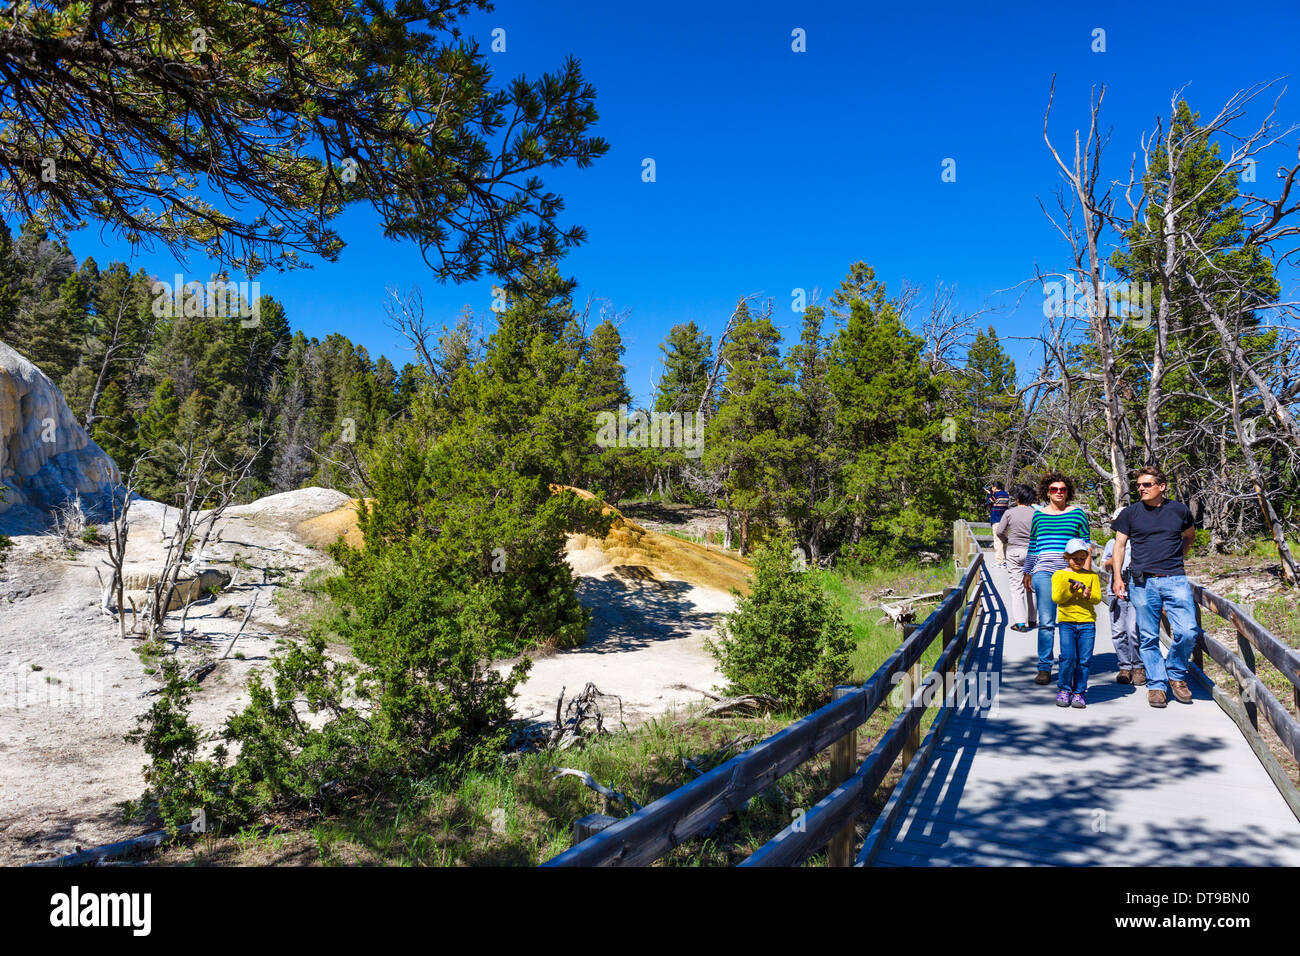 Tourist on trail by Orange Spring Mound travertine formation, Mammoth Hot Springs Terraces, Yellowstone National Park, WY, USA Stock Photo